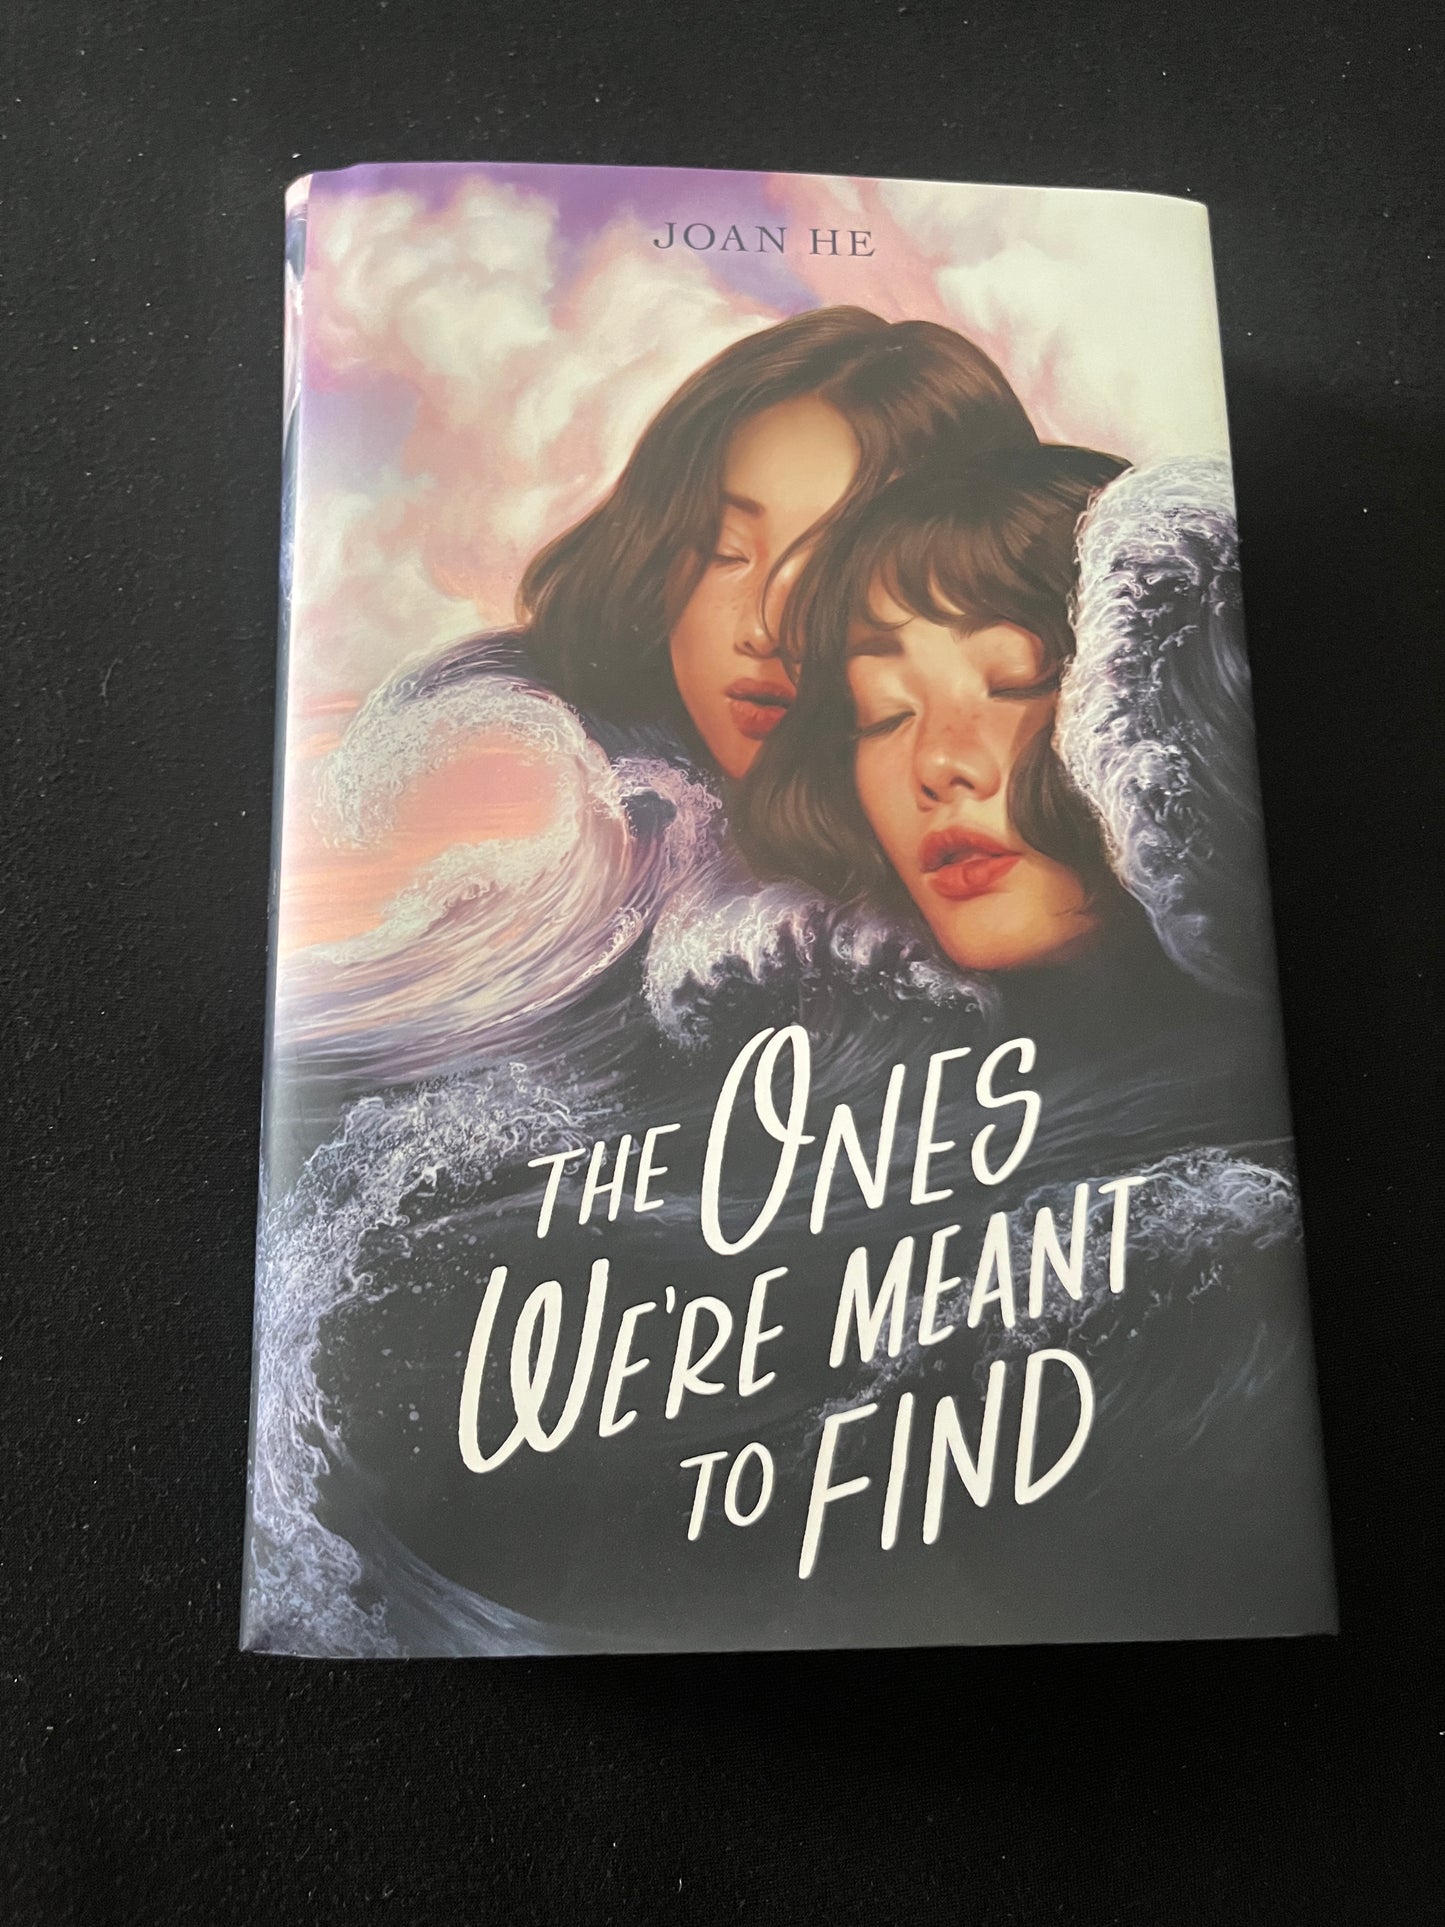 THE ONES WE'RE MEANT TO FIND by Joan He